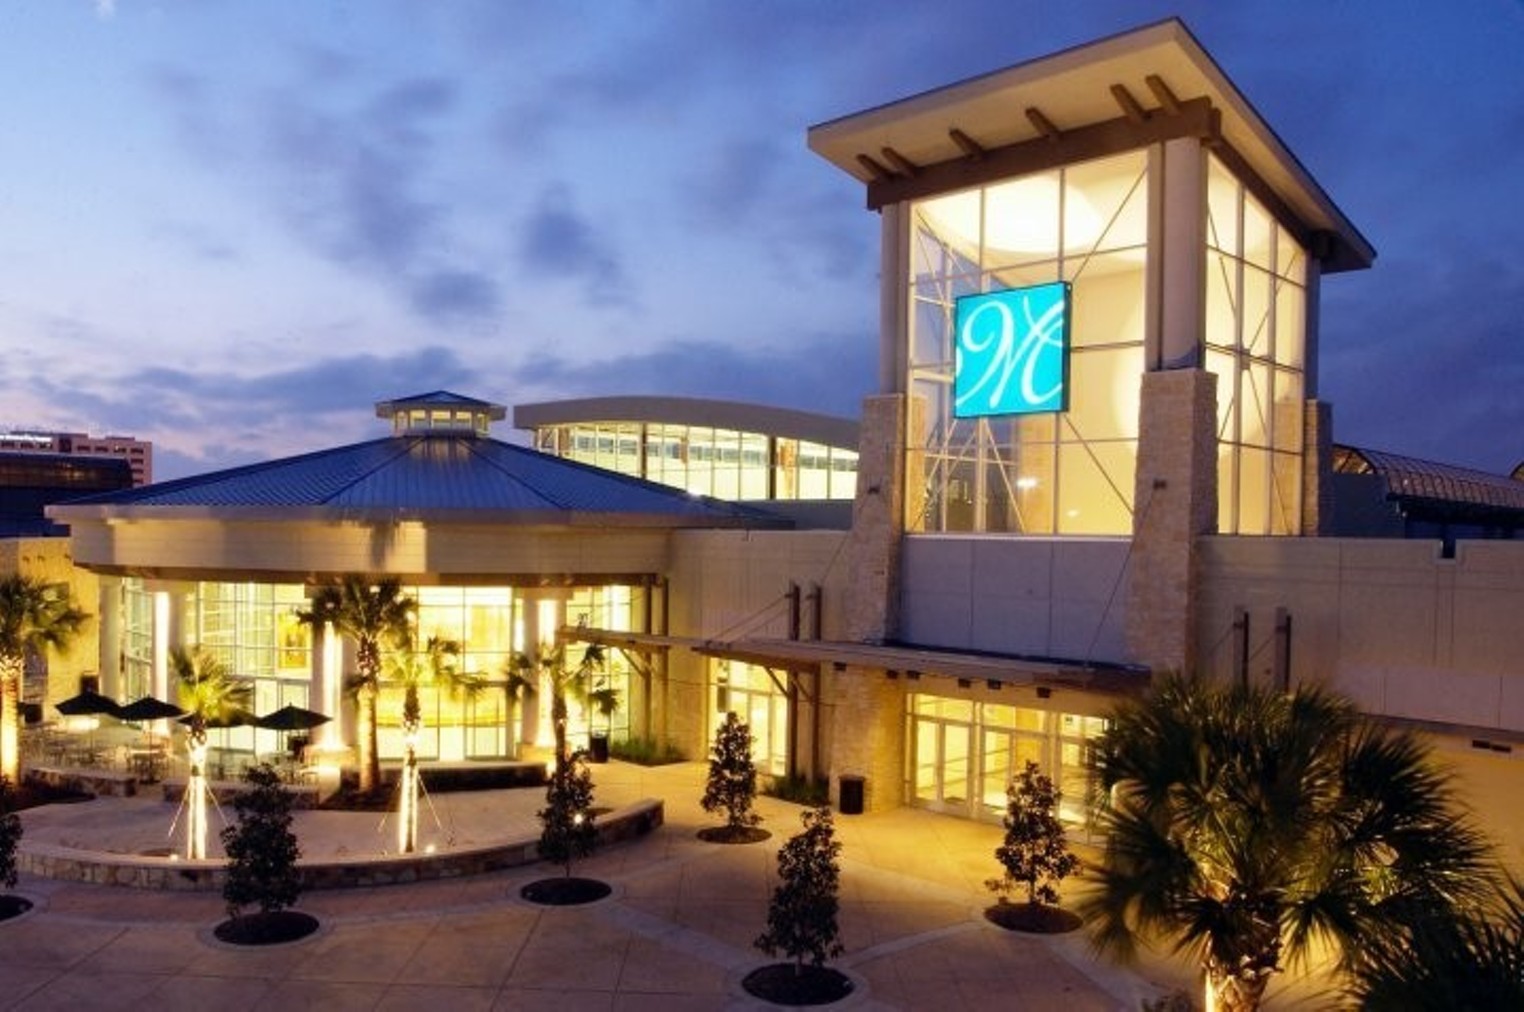 Best Mall-Walking 2000 Memorial City Mall Best of Houston® Best Restaurants, Bars, Clubs, Music and Stores in Houston Houston Press image